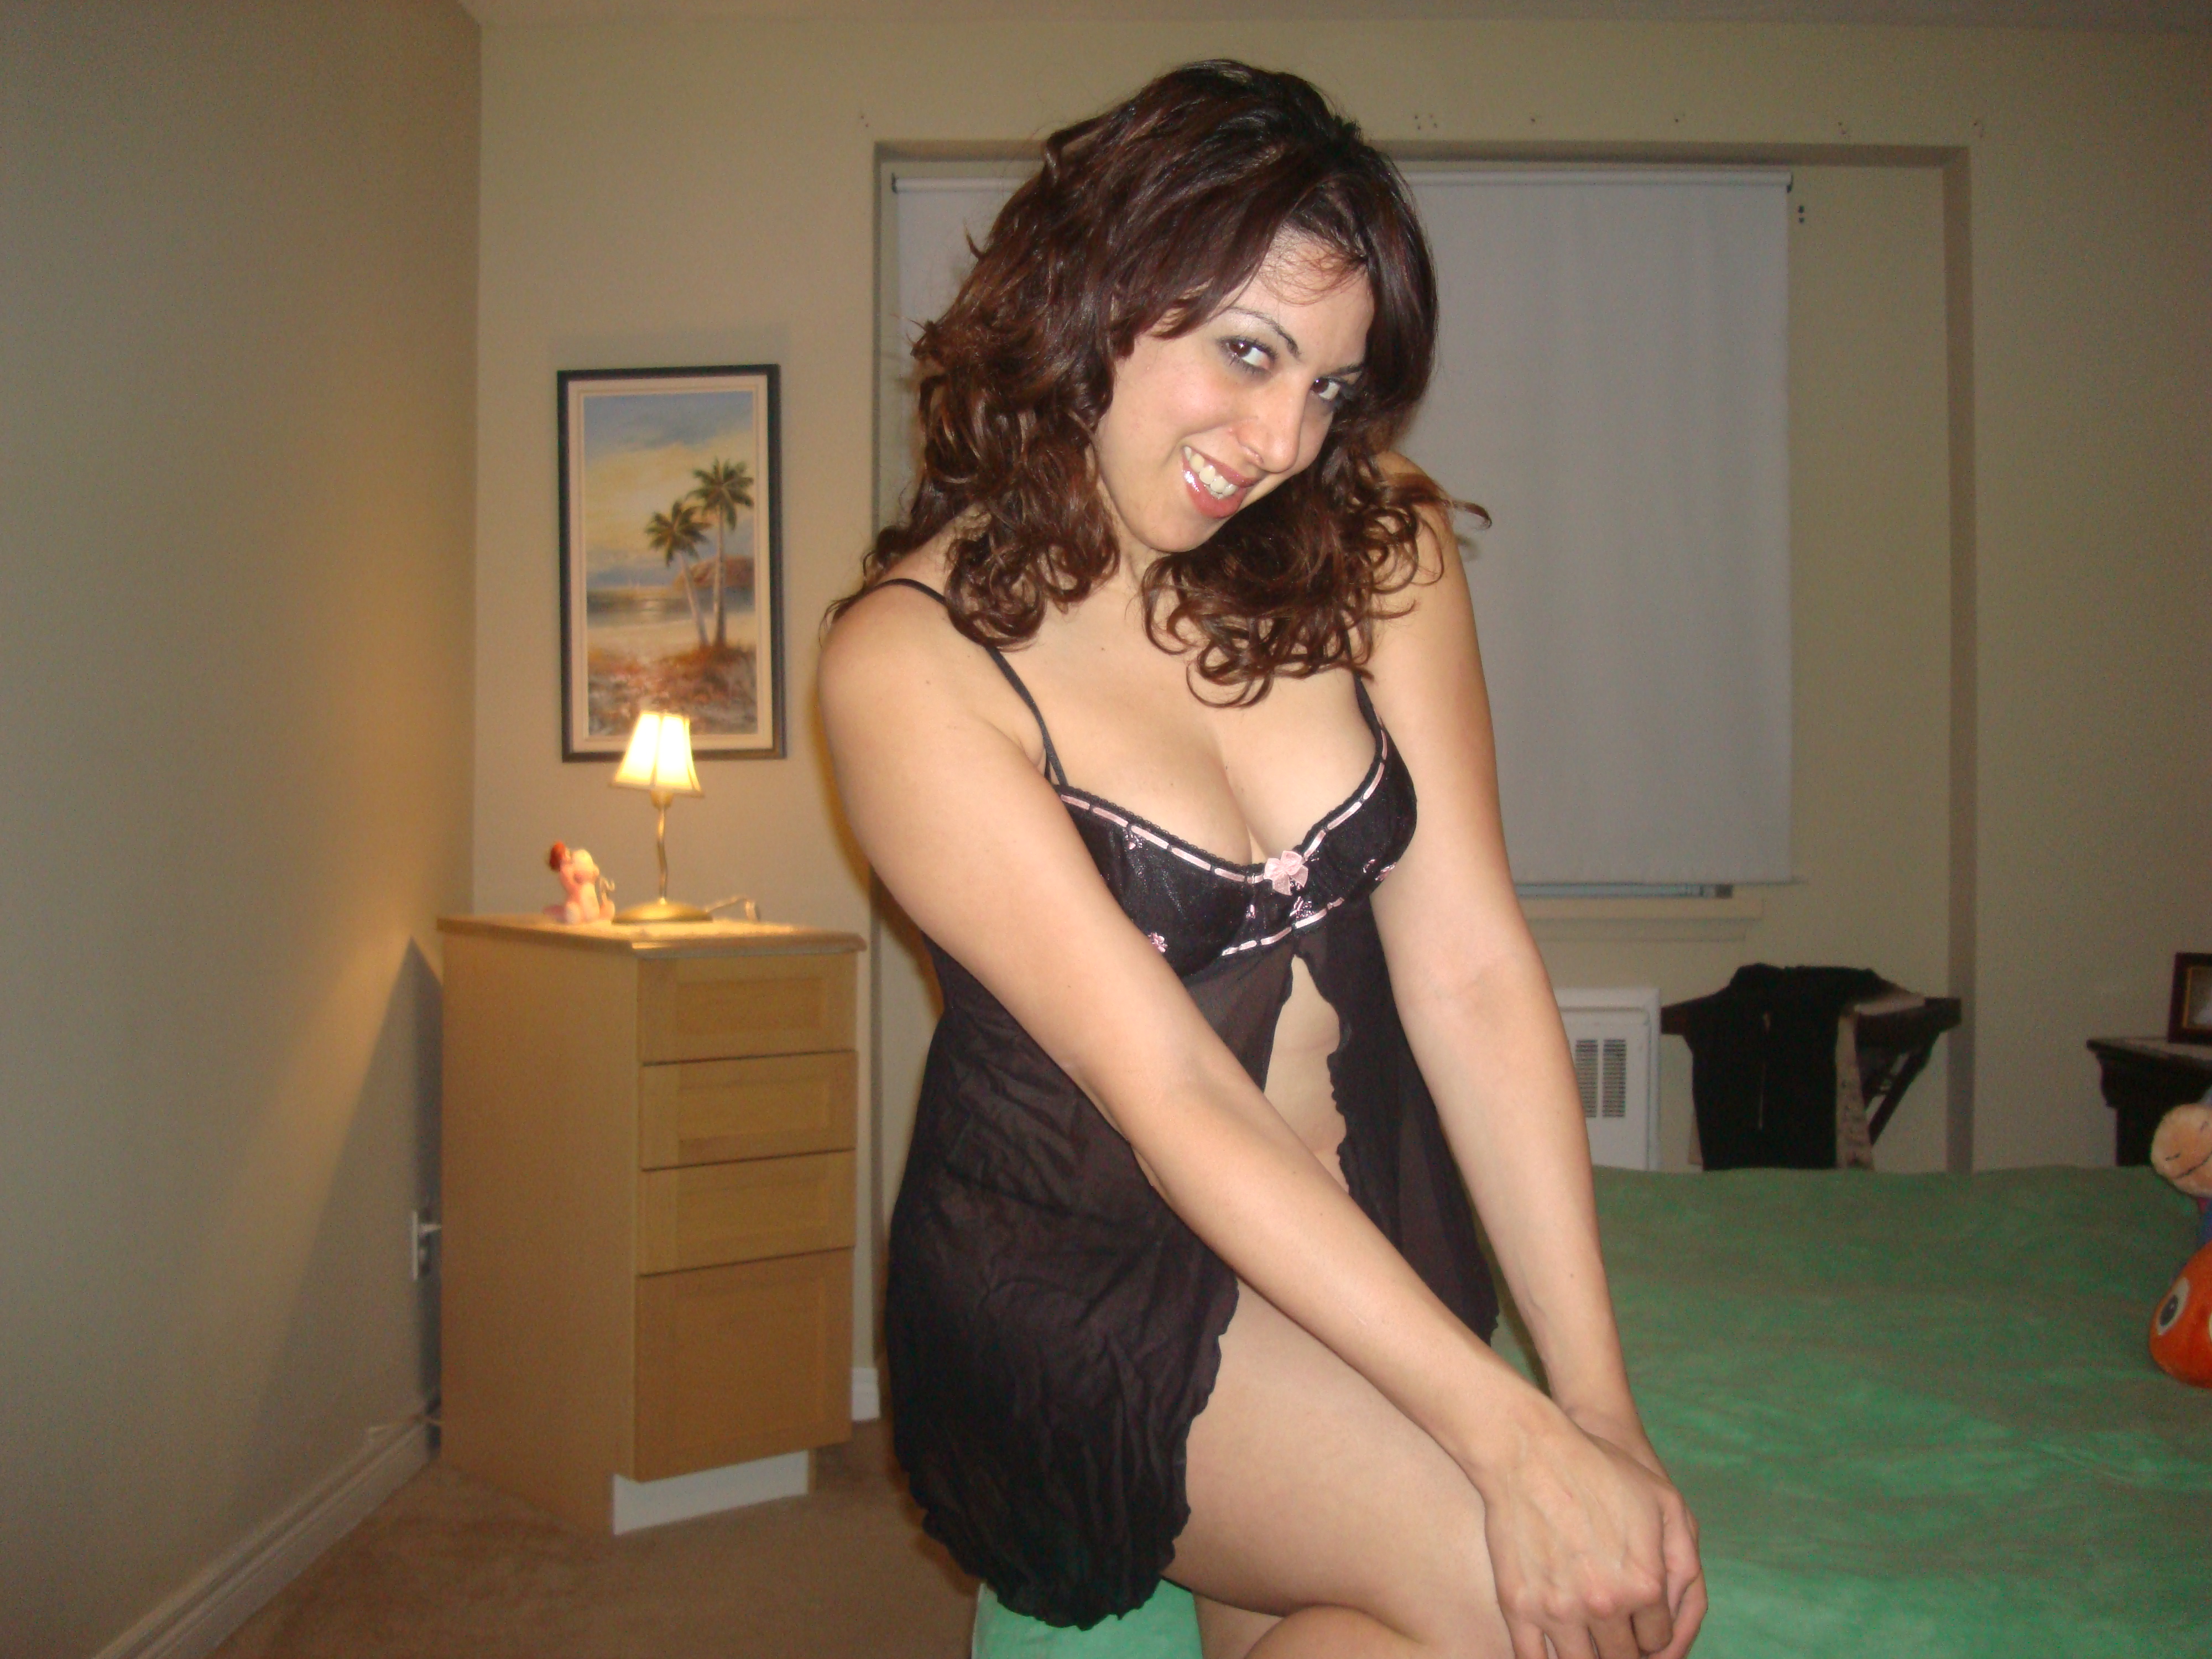 Me Posing In Sexy Lingerie And Less At